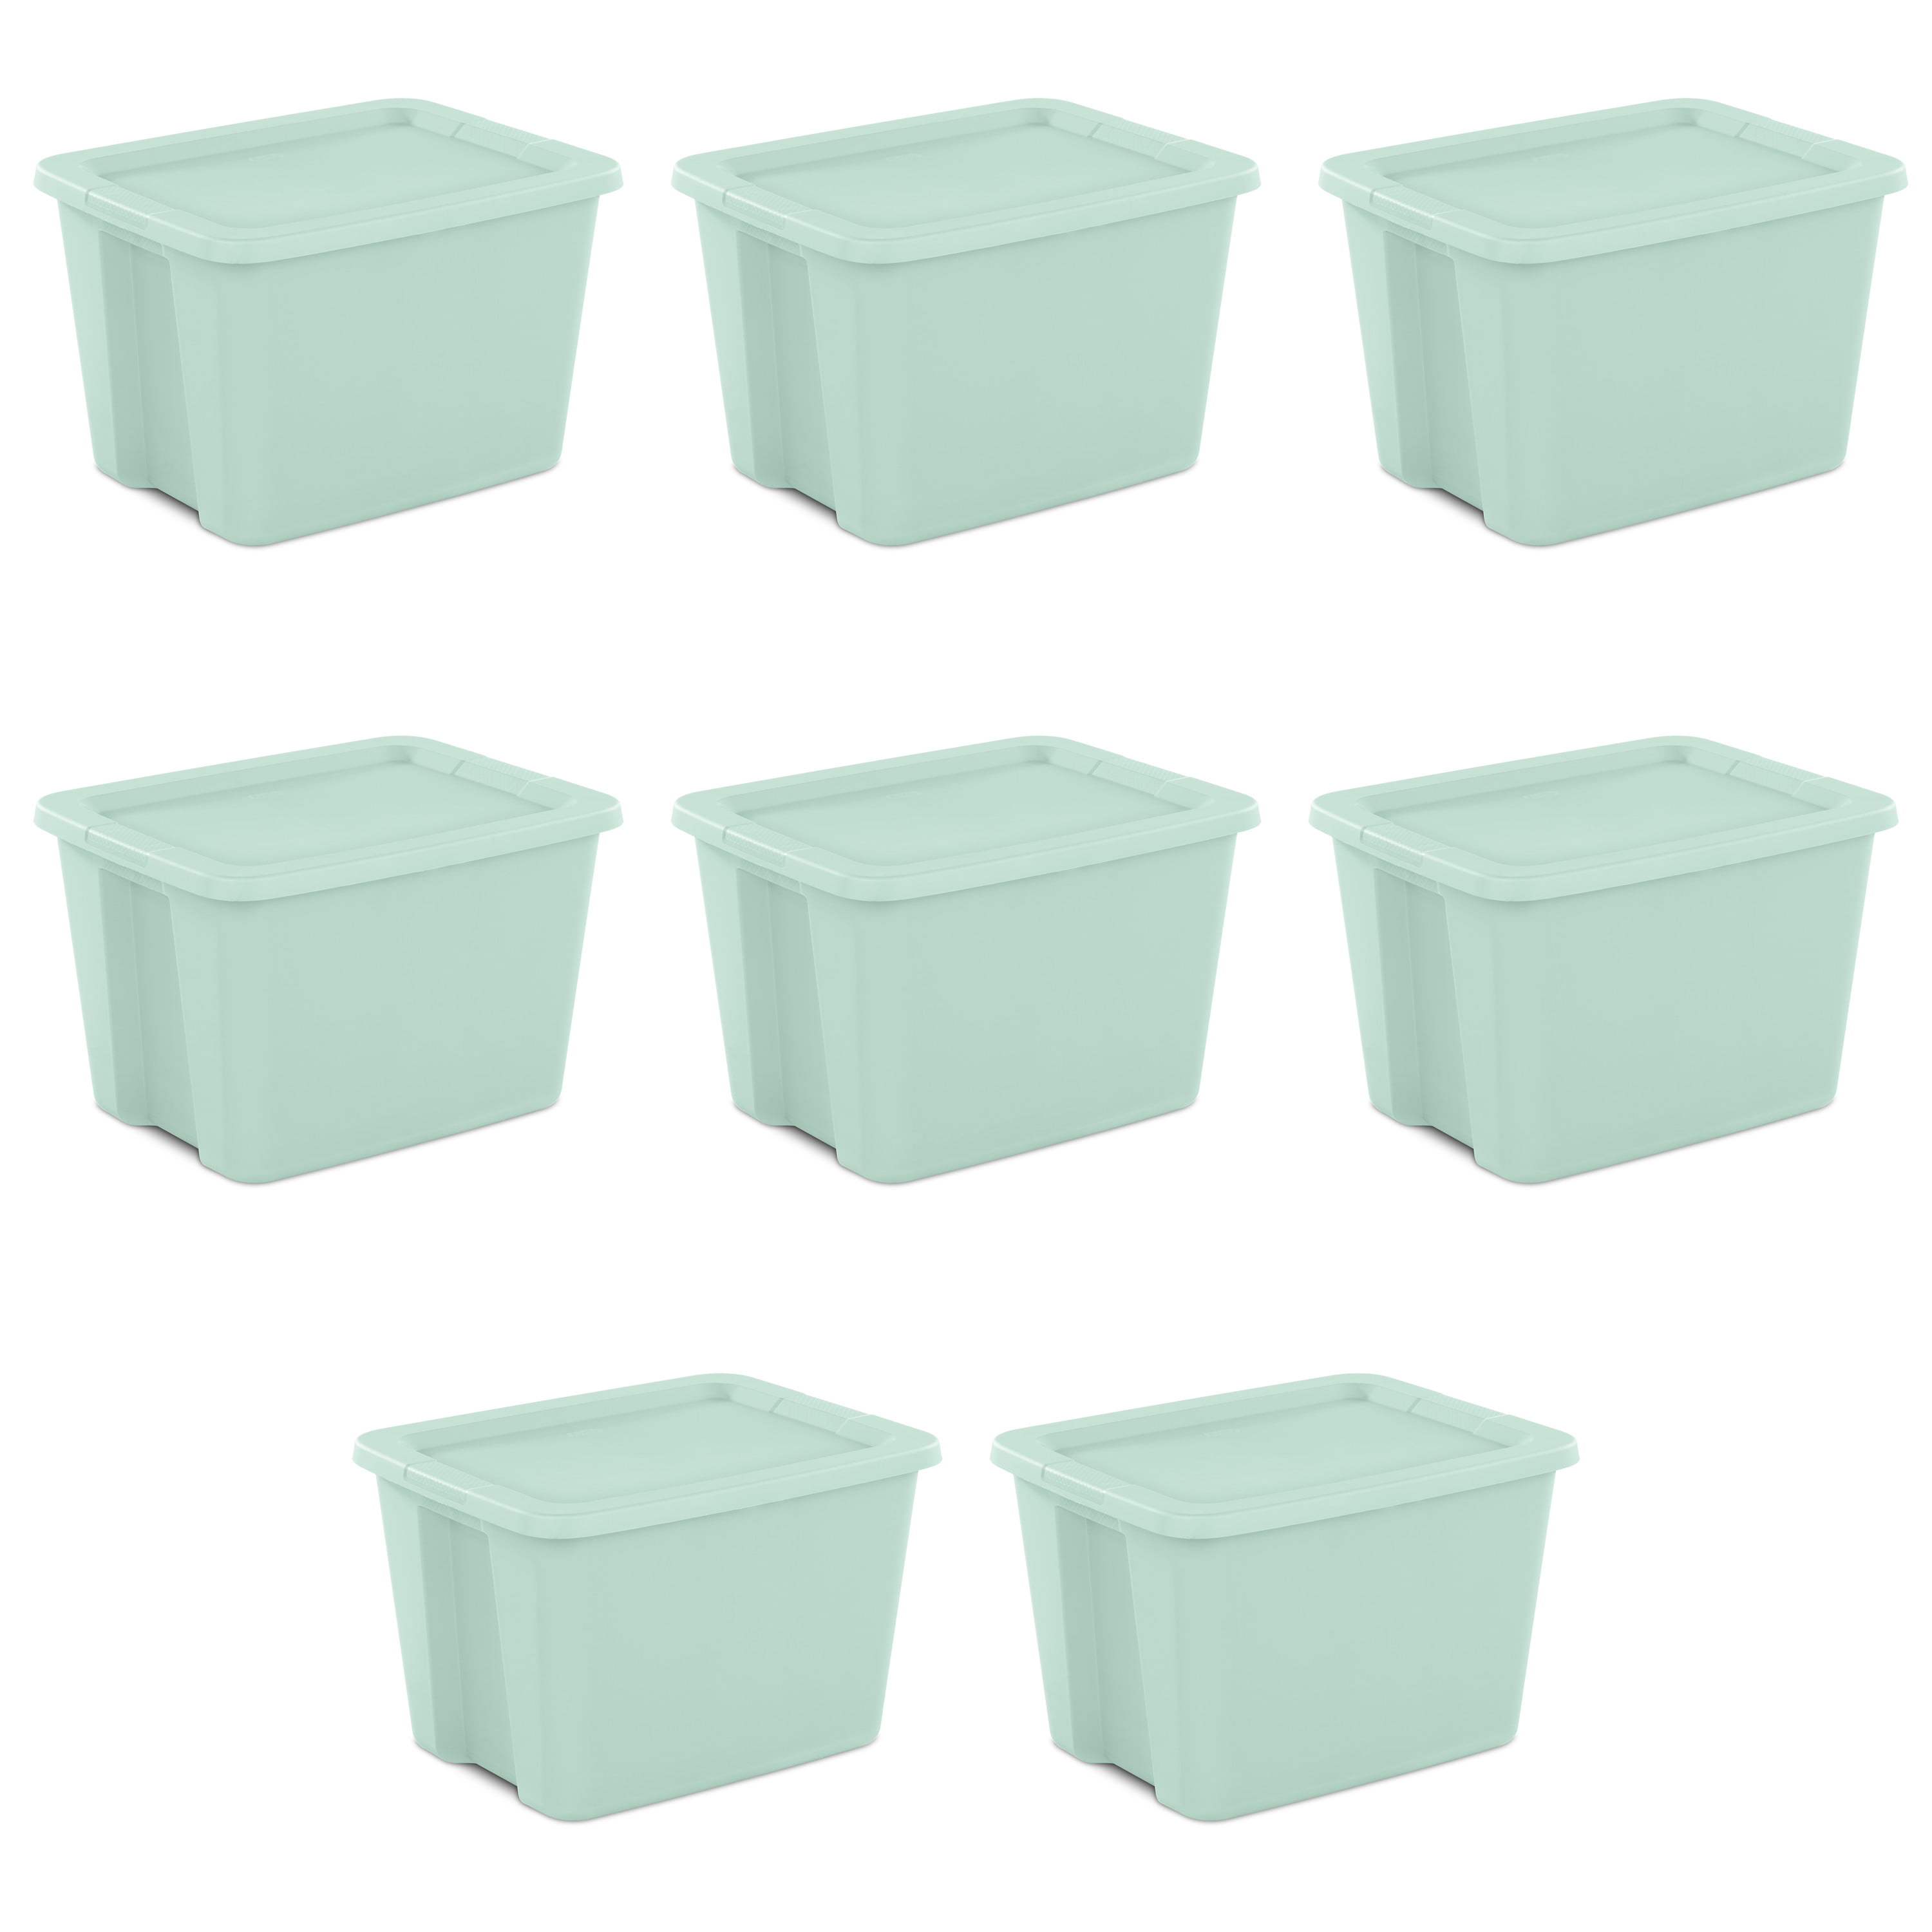 Sterilite 18 Gallon Durable Construction Molded-in Handles Tote Box- Gray,  24″ x 18.5″ x 15.8″ – Pack of 8 – Find Organizers That Fit